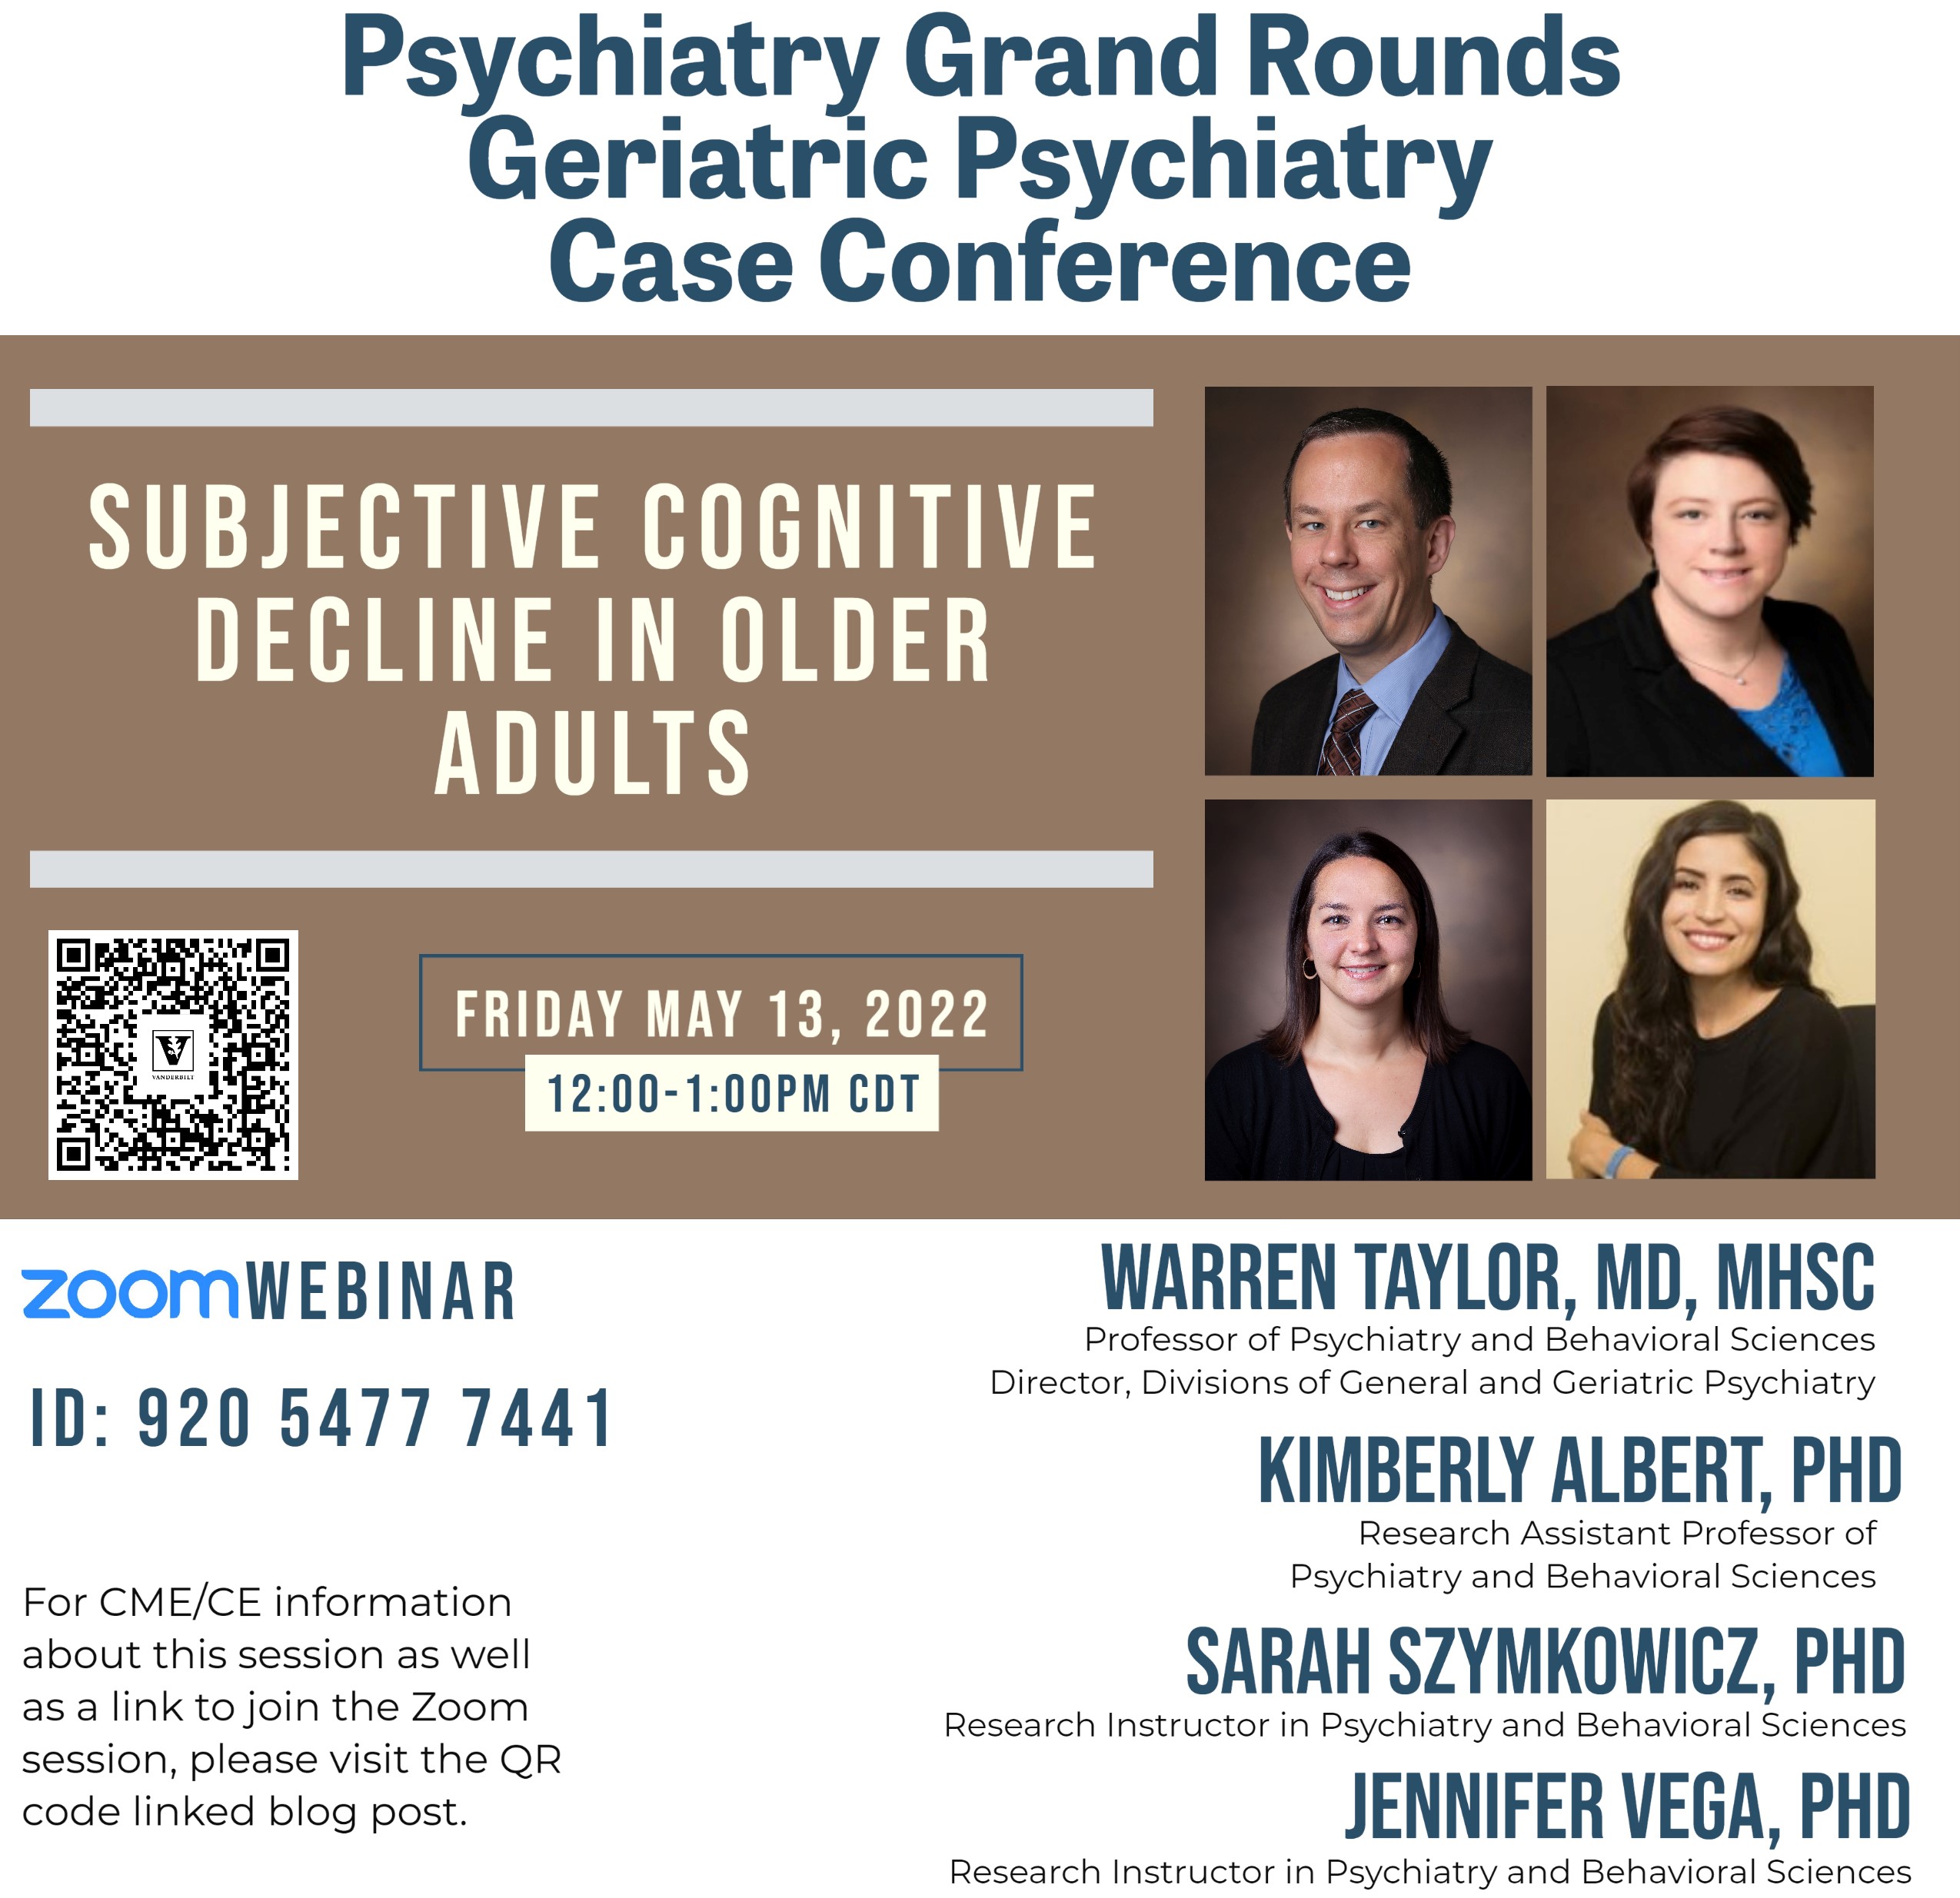 Psychiatry Grand Rounds 5/13 Geriatric Psychiatry Case Conference